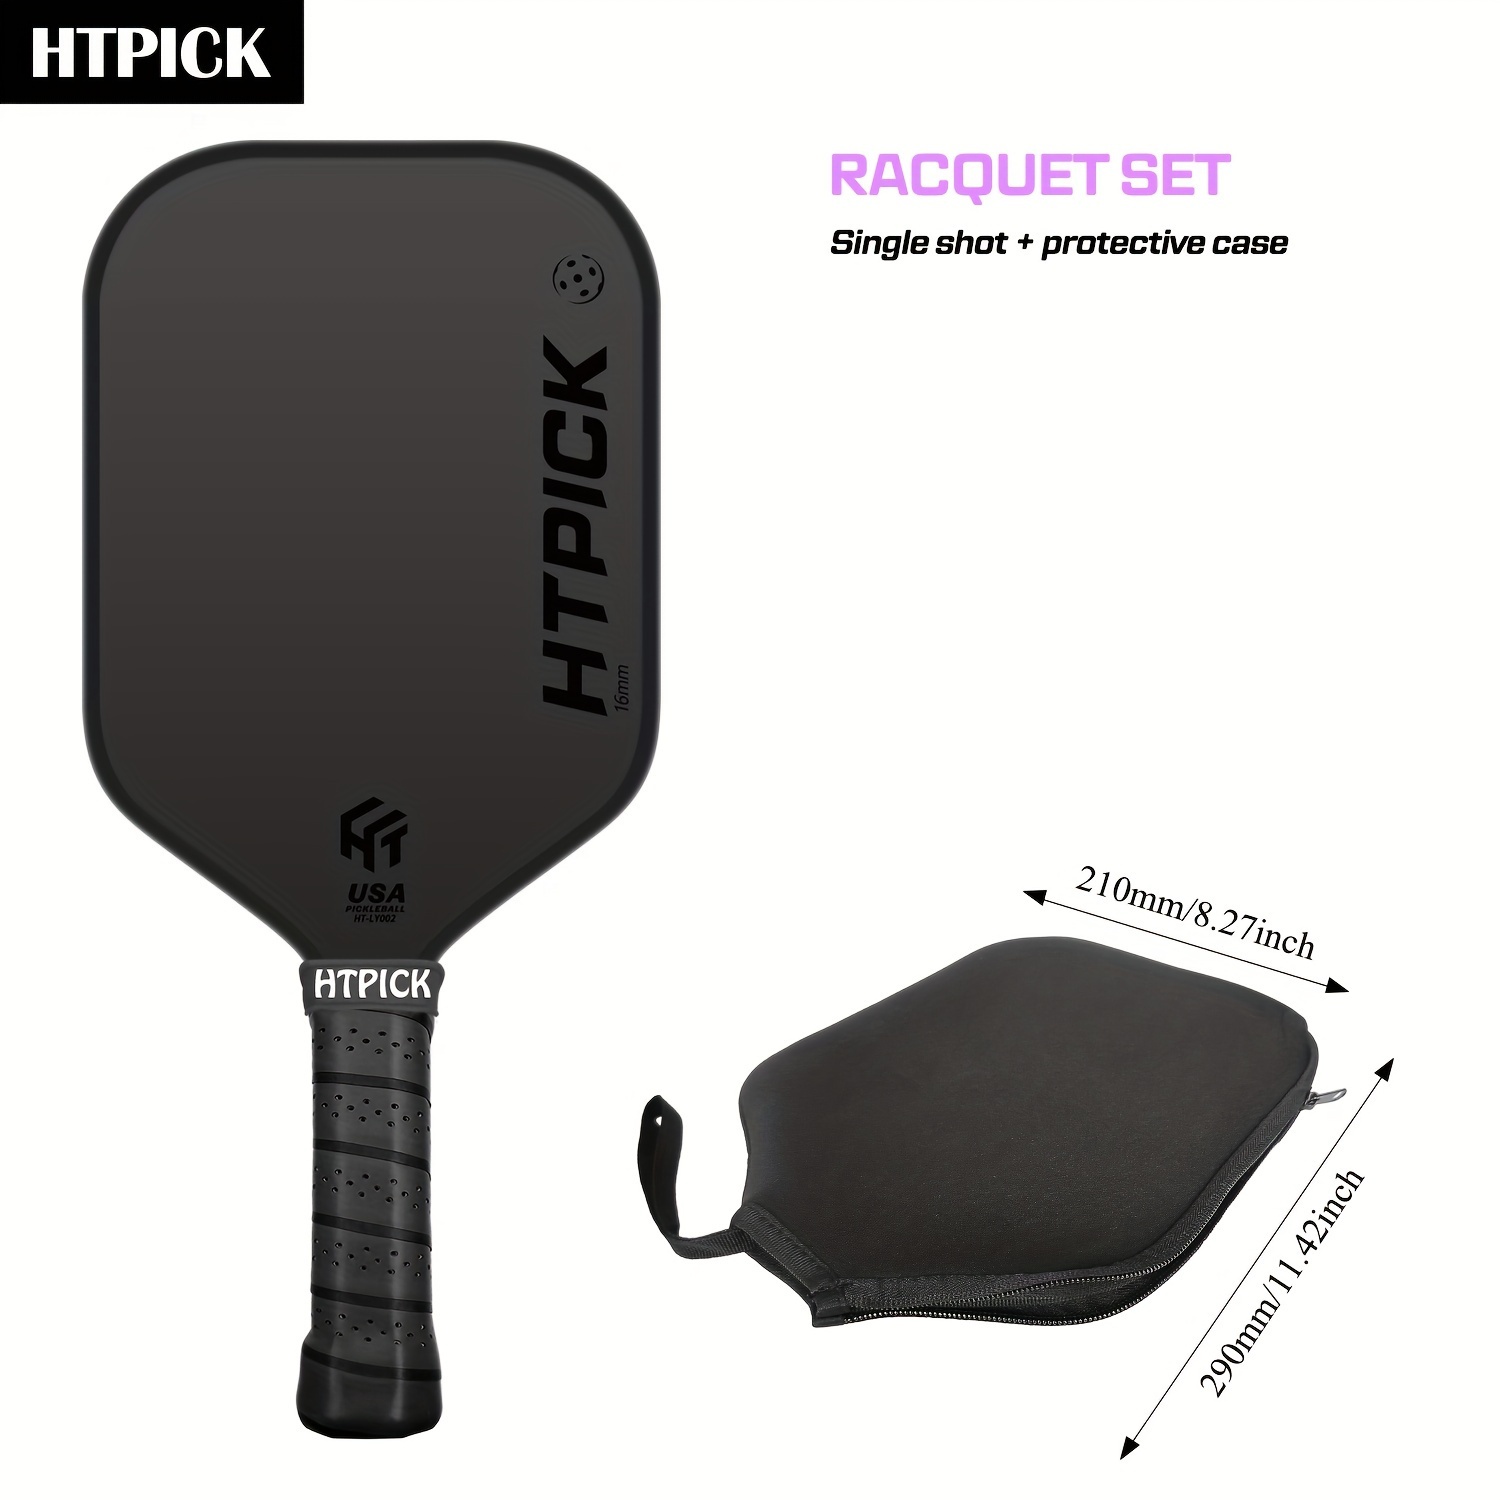 

Pickleball Racket, 16mm T700 Original Carbon Fiber Pickleball Racket, With Excellent Gravel And Rotation Ability, Power And Control Functions